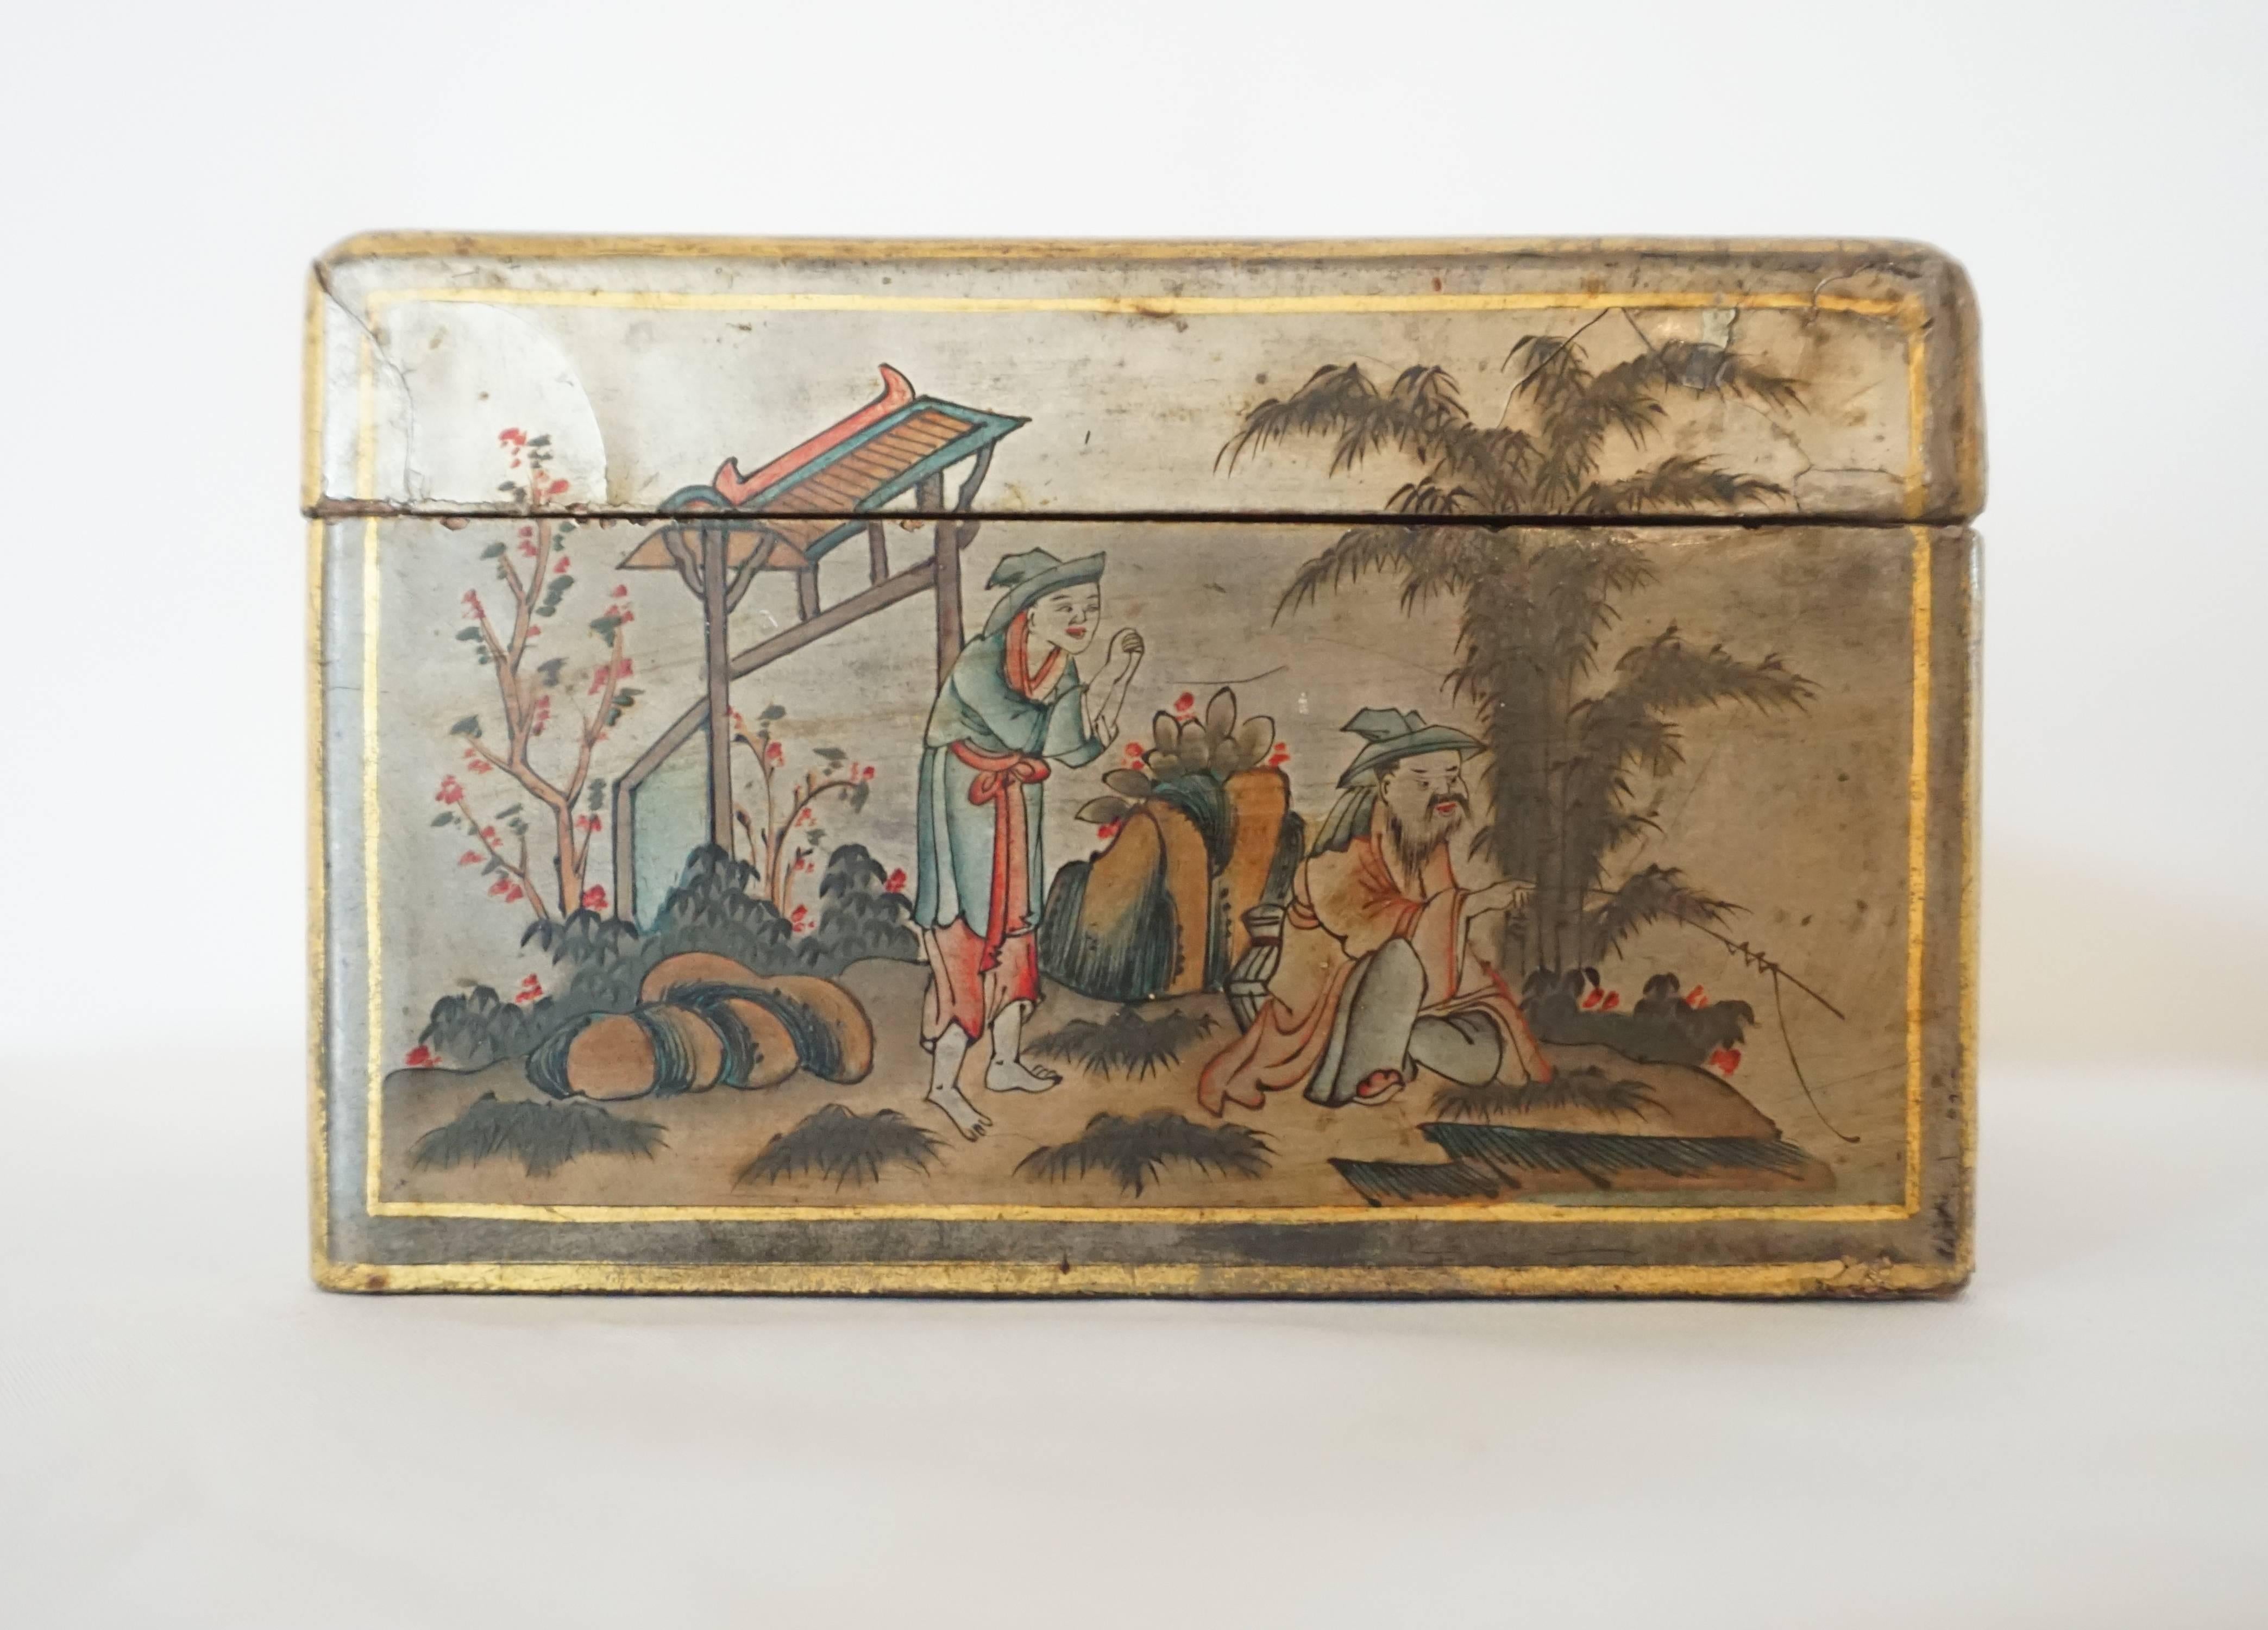 18th Century Chinese Export Silver Lacquer Tea Caddy, circa 1800